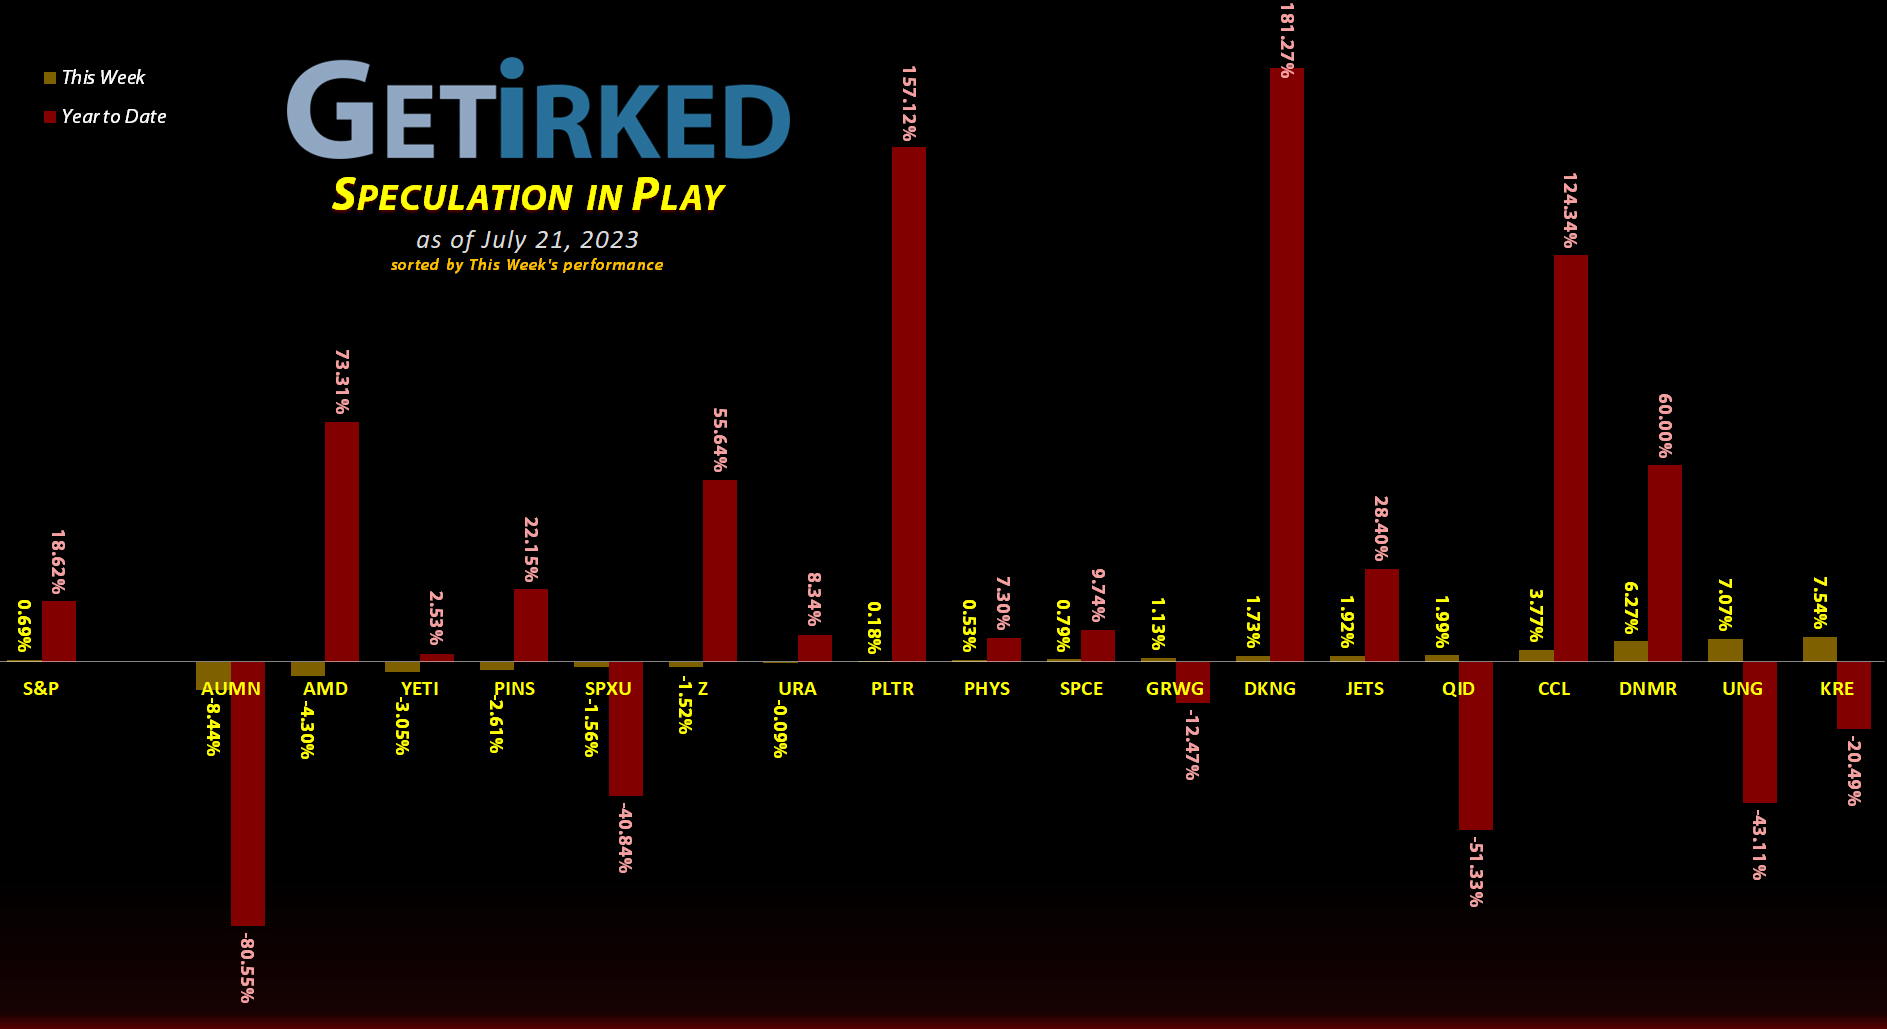 Get Irked's Speculation in Play - July 21, 2023